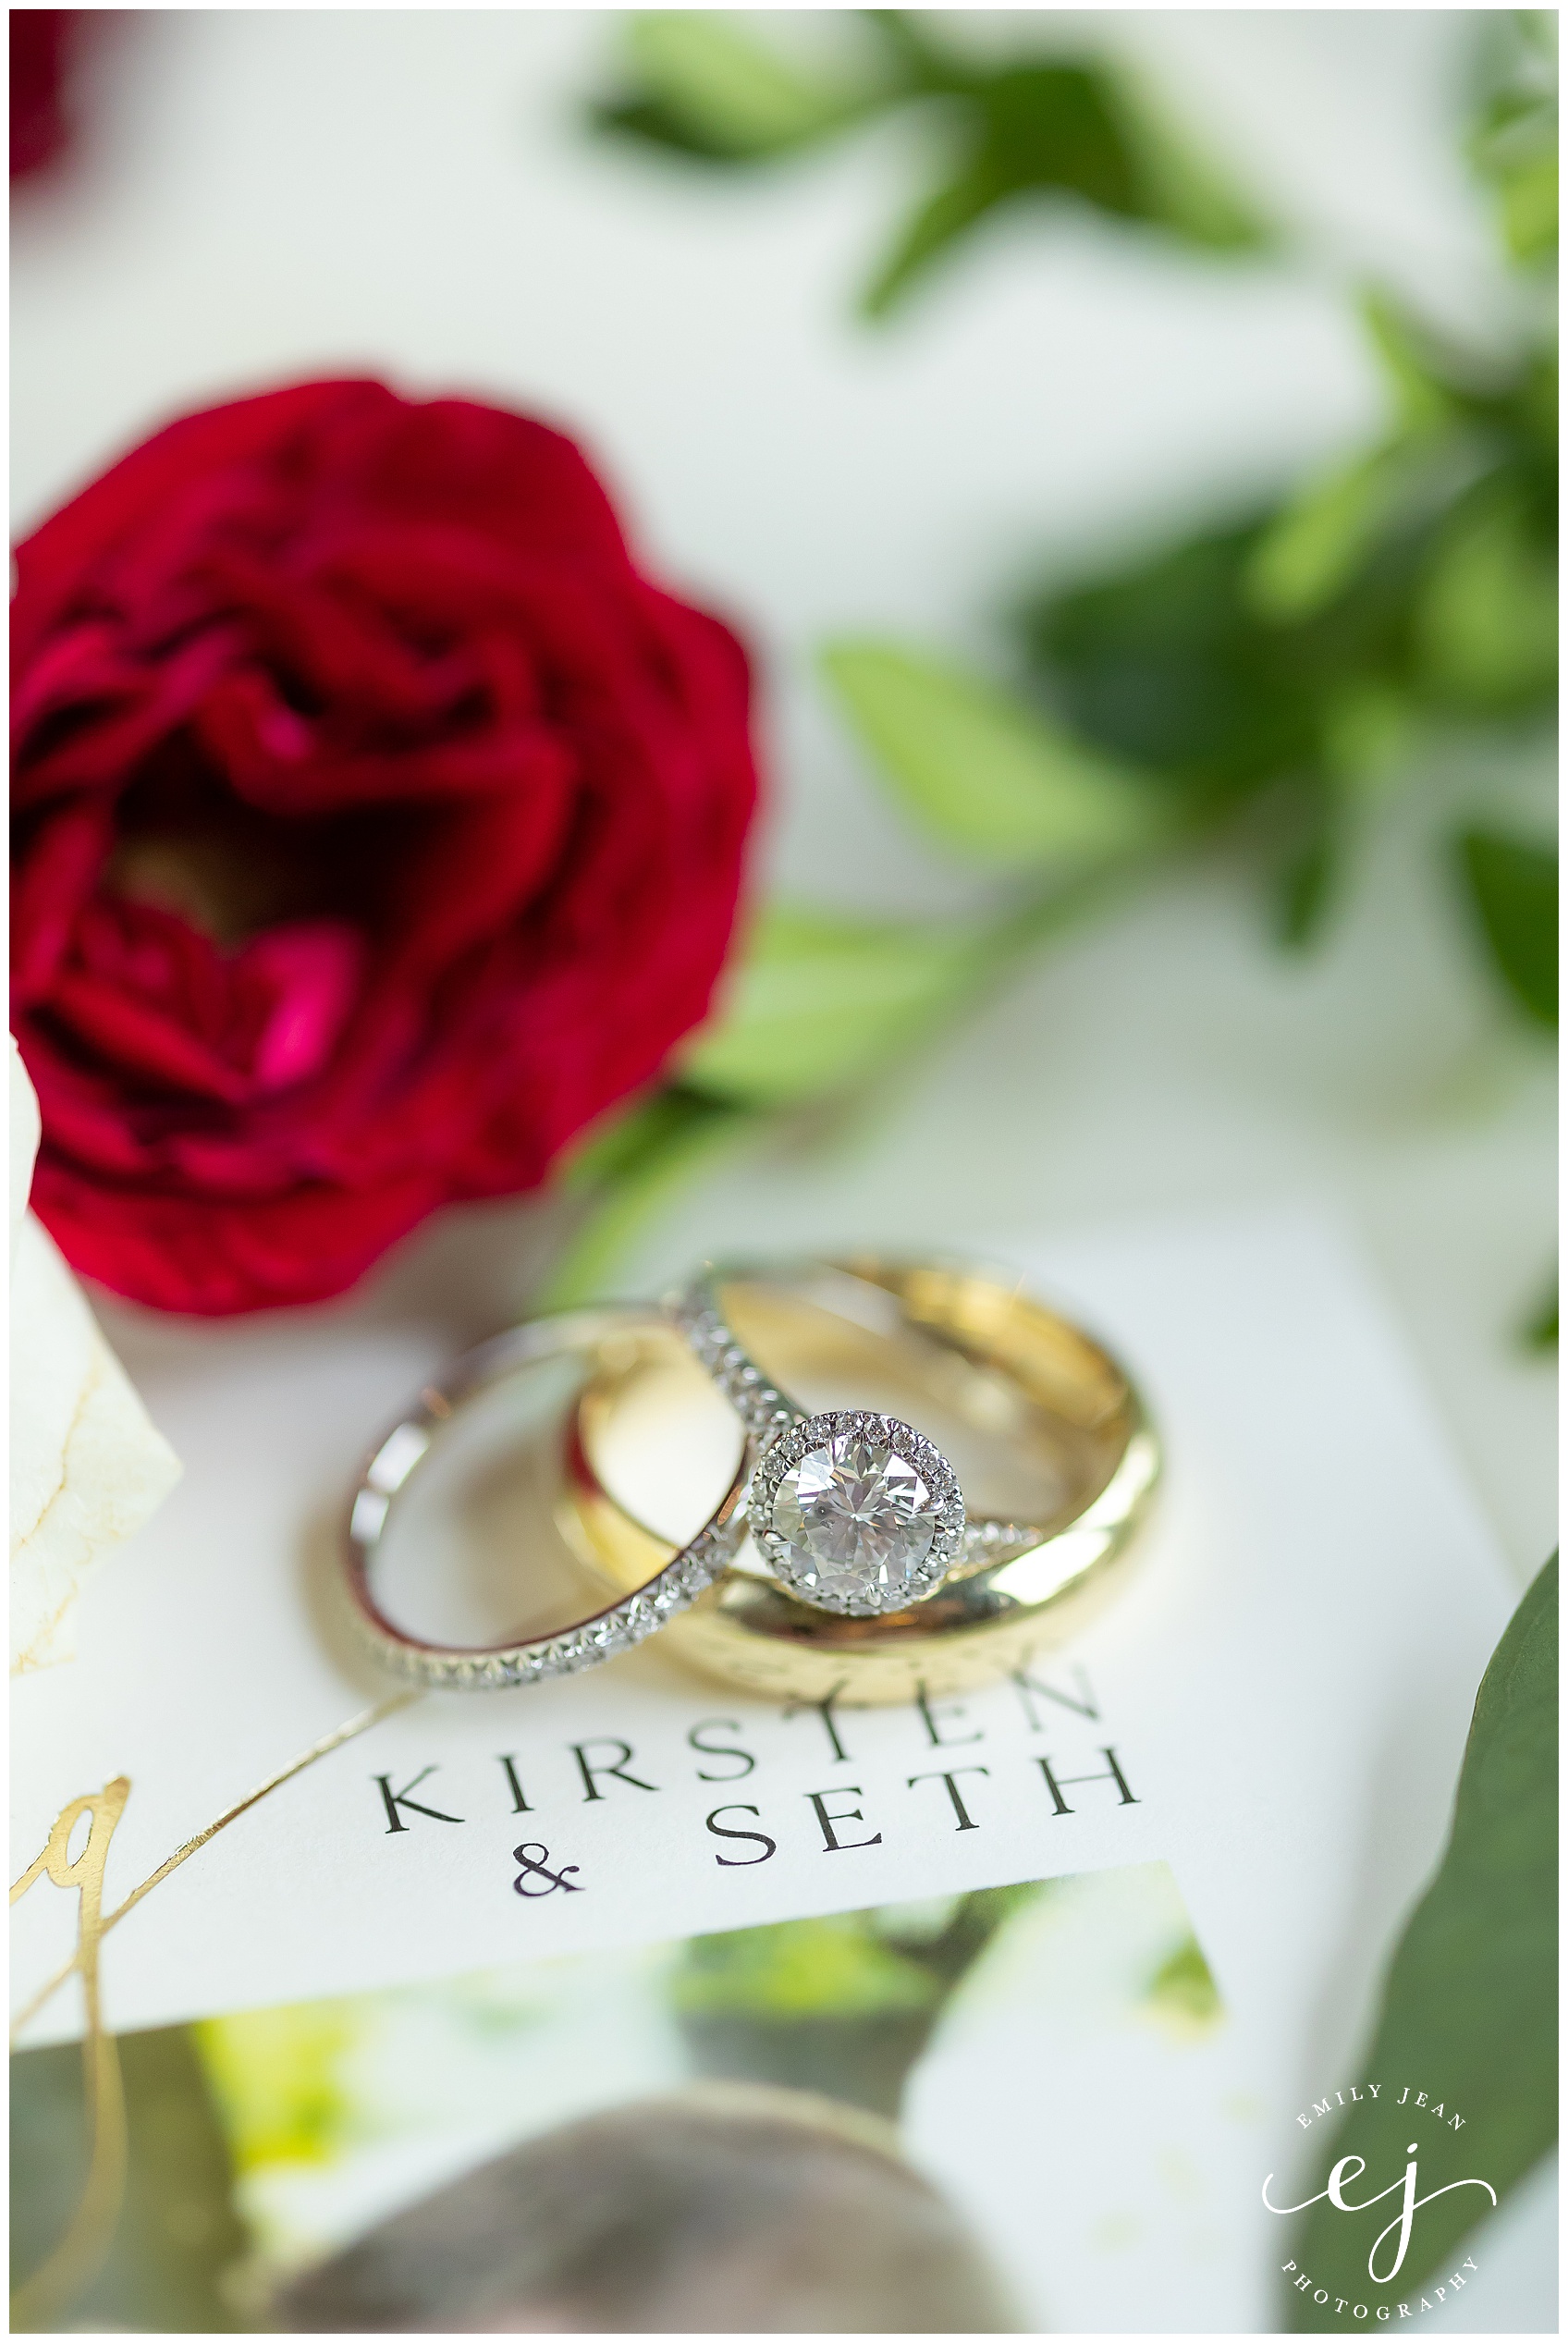 gold and silver wedding rings with flowers and invitation